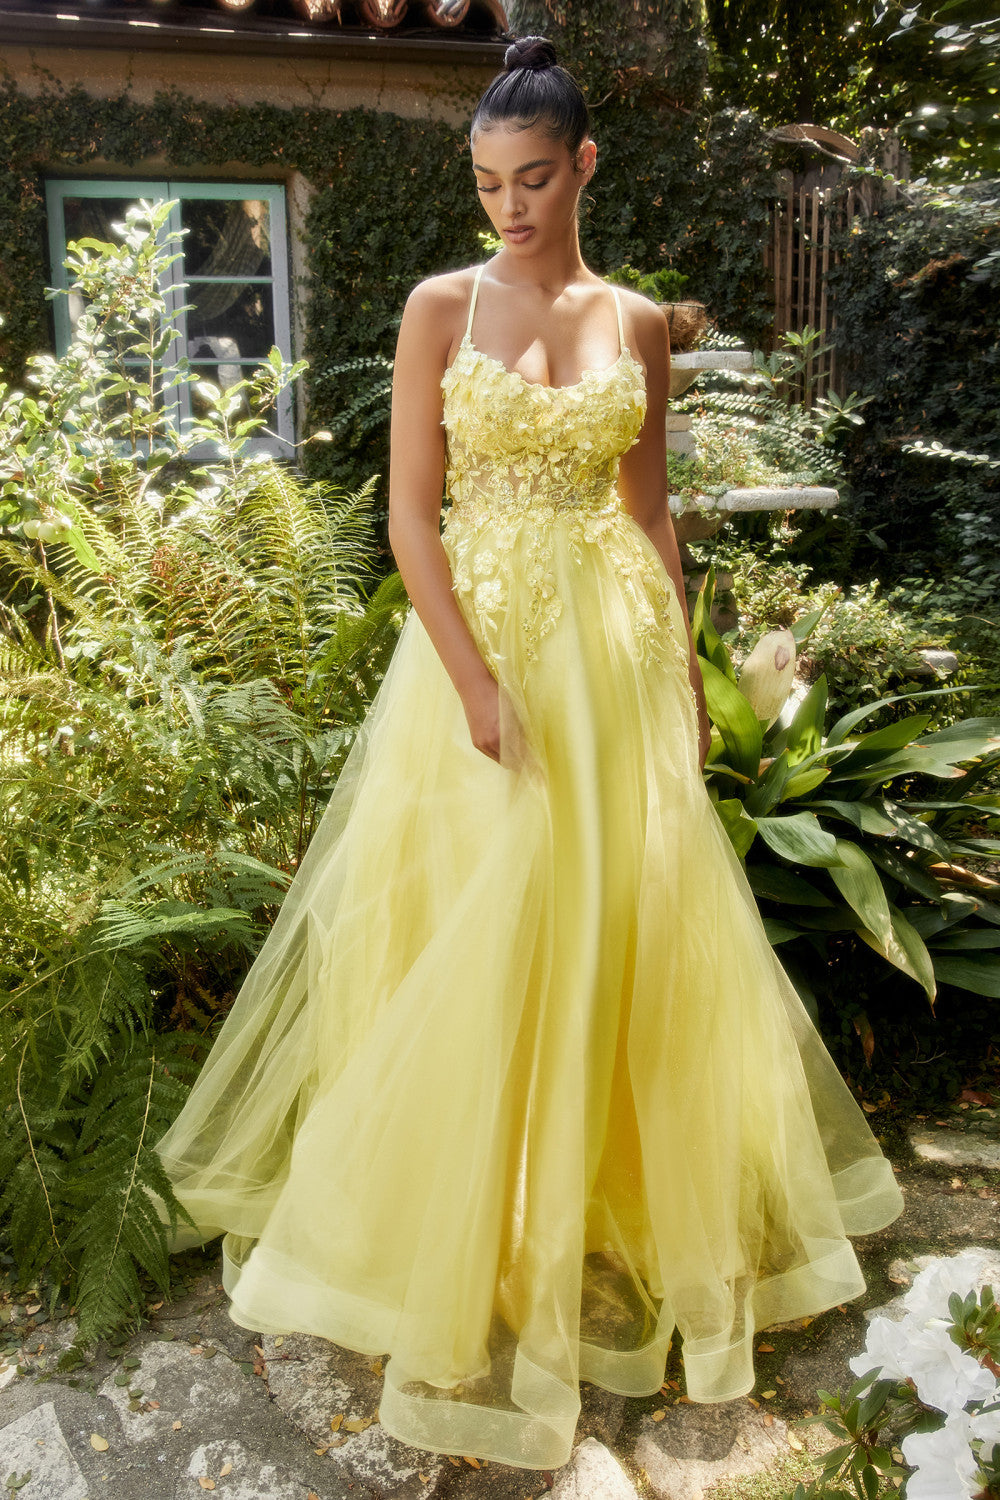 Floral Applique A-Line Gown by Andrea & Leo Couture A1142 Penelope Gown - Special Occasion